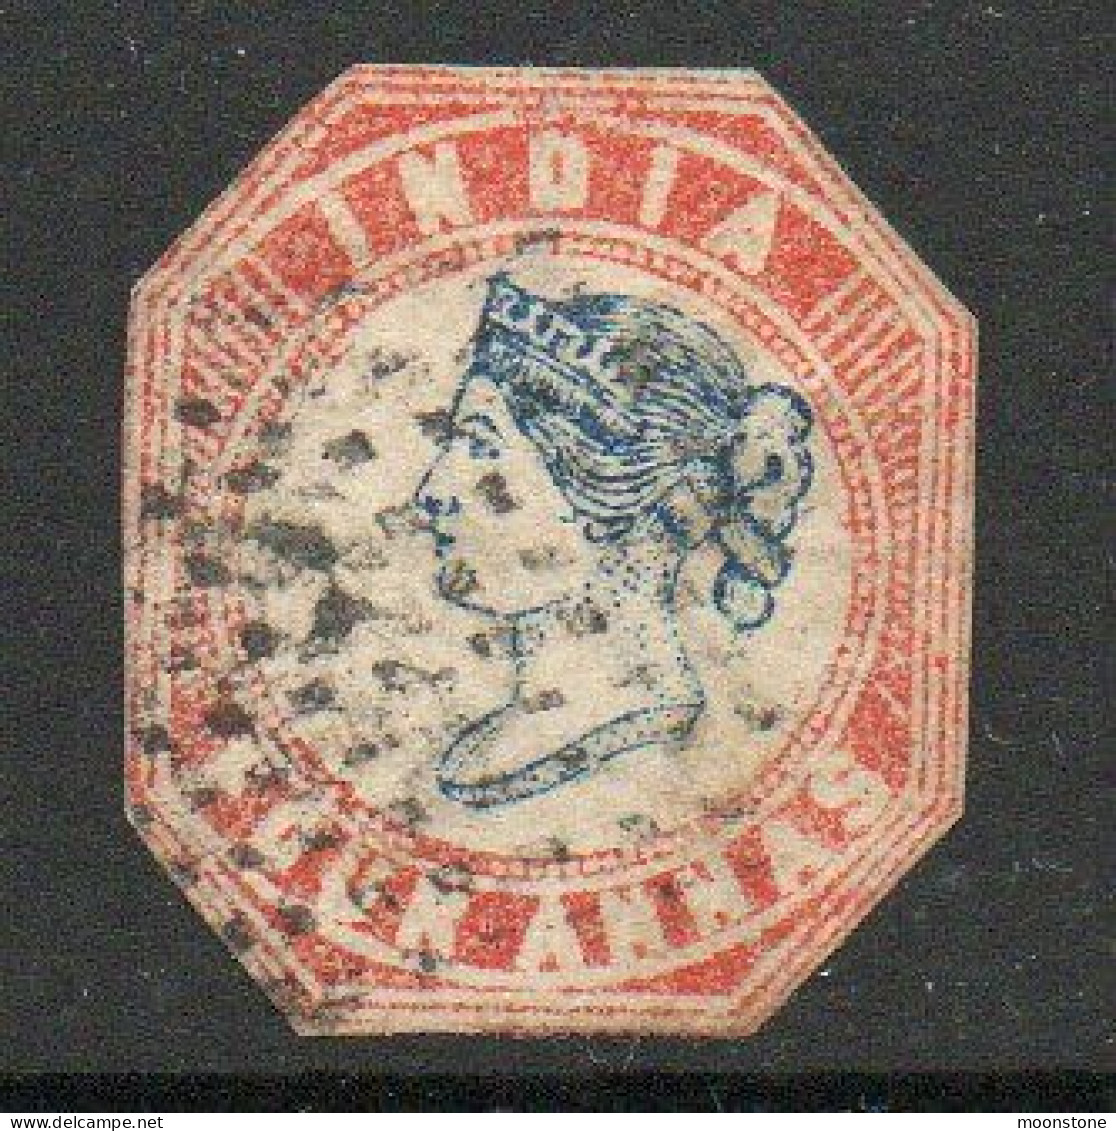 India 1854 4 Annas Blue & Red,  Cut To Shape, Head Die II, Frame Die I, Used, SG 19 (E) - 1854 East India Company Administration